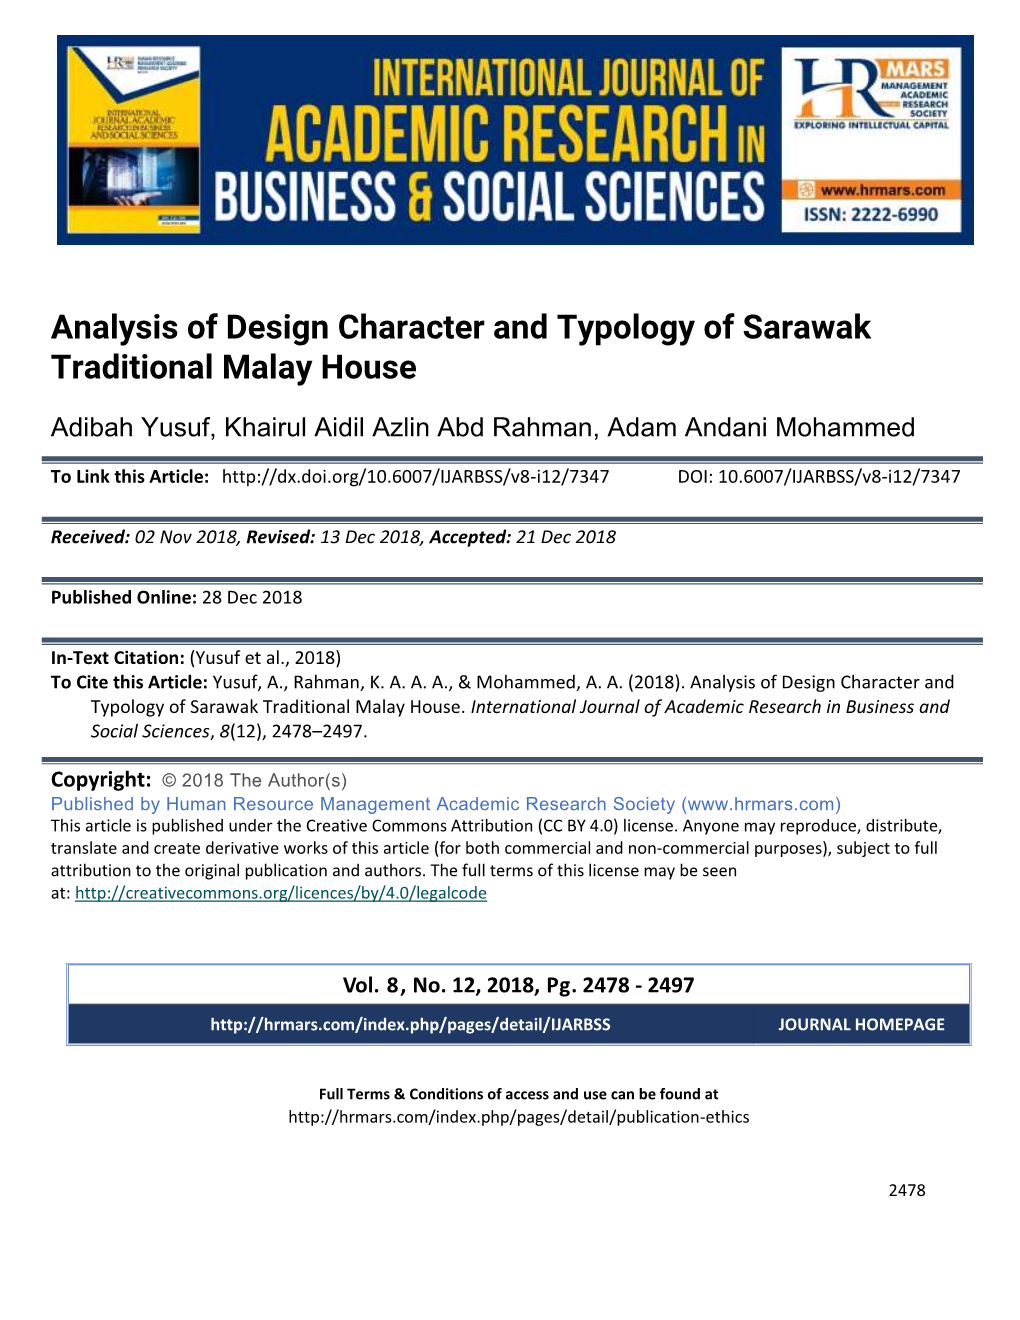 Analysis of Design Character and Typology of Sarawak Traditional Malay House